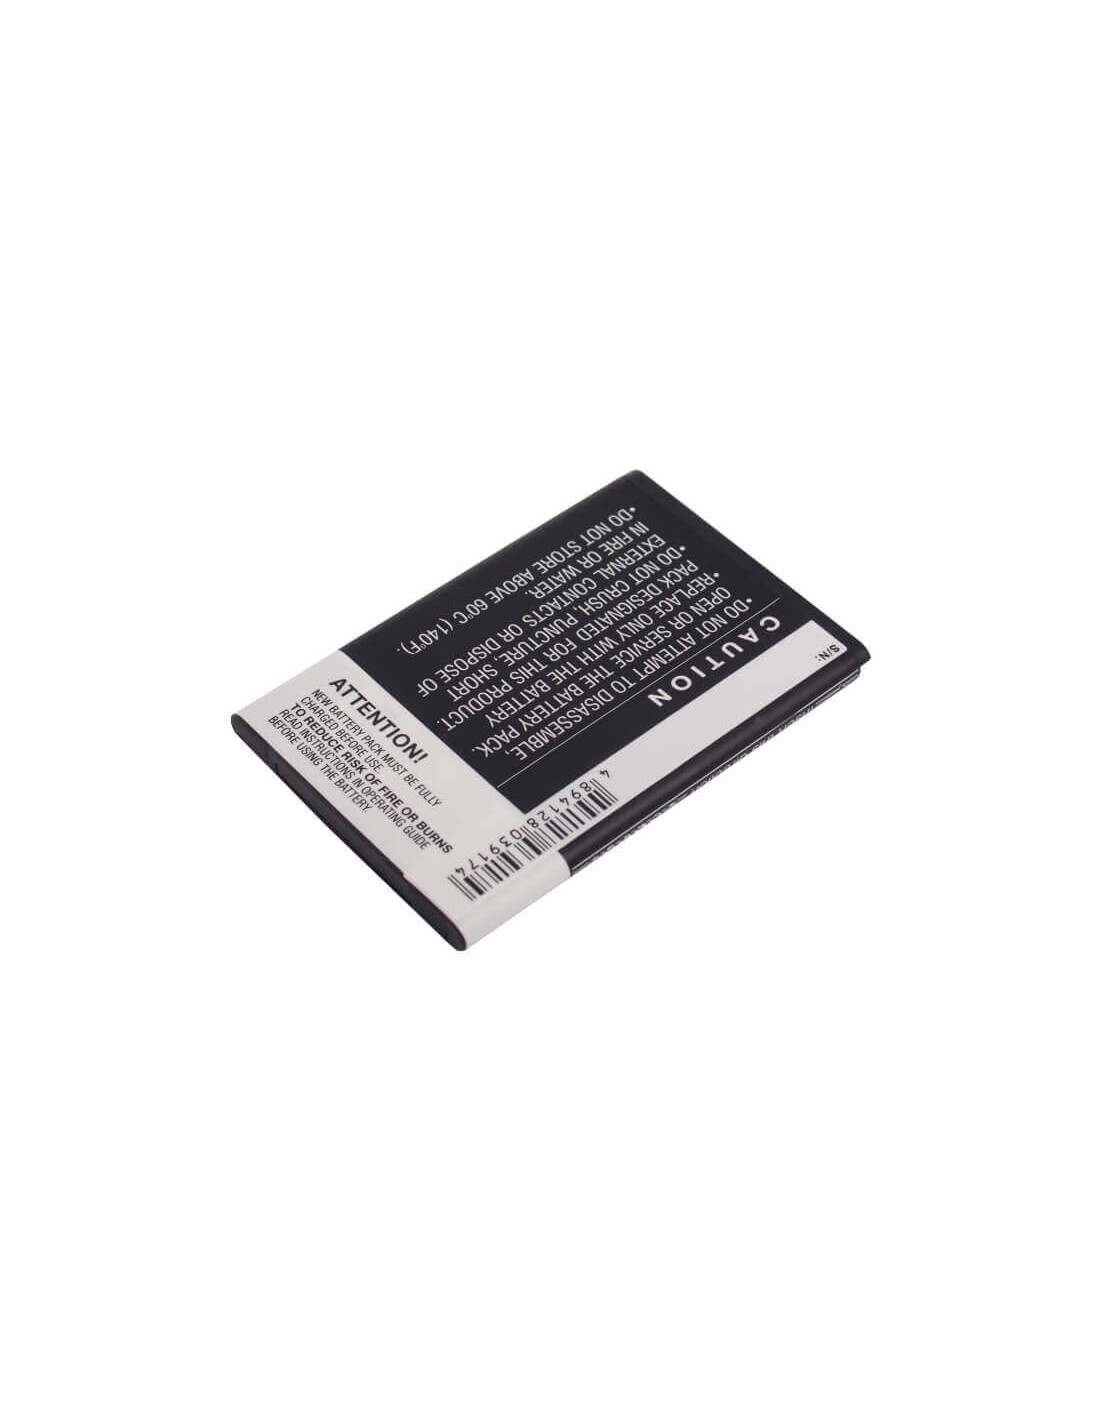 Battery for HTC 7 Pro, T7576 3.7V, 1600mAh - 5.92Wh